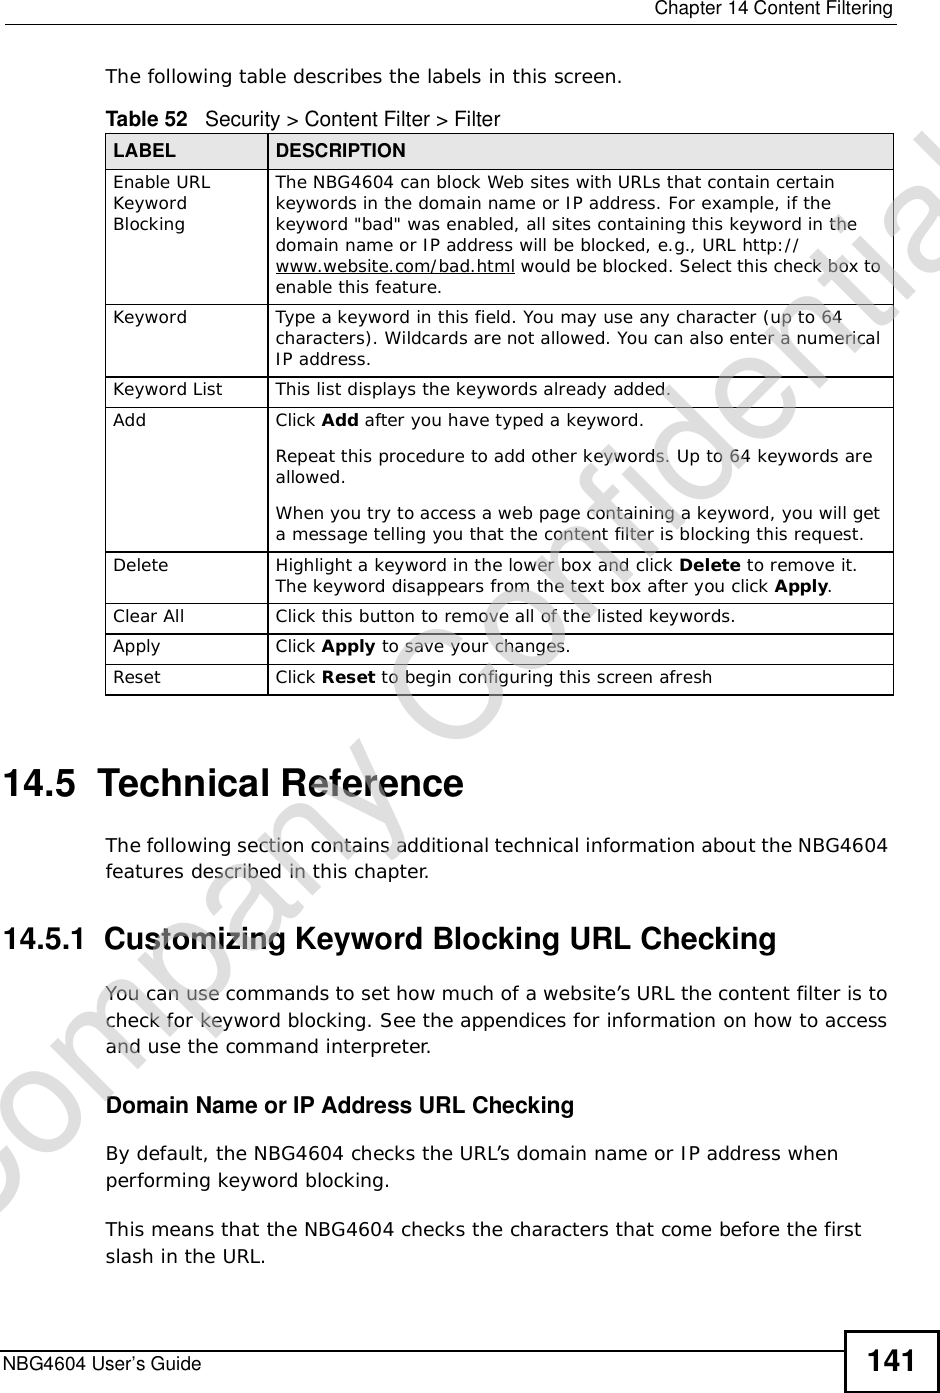  Chapter 14Content FilteringNBG4604 User’s Guide 141The following table describes the labels in this screen.14.5  Technical ReferenceThe following section contains additional technical information about the NBG4604 features described in this chapter.14.5.1  Customizing Keyword Blocking URL CheckingYou can use commands to set how much of a website’s URL the content filter is to check for keyword blocking. See the appendices for information on how to access and use the command interpreter.Domain Name or IP Address URL CheckingBy default, the NBG4604 checks the URL’s domain name or IP address when performing keyword blocking.This means that the NBG4604 checks the characters that come before the first slash in the URL.Table 52   Security &gt; Content Filter &gt; FilterLABEL DESCRIPTIONEnable URL Keyword BlockingThe NBG4604 can block Web sites with URLs that contain certain keywords in the domain name or IP address. For example, if the keyword &quot;bad&quot; was enabled, all sites containing this keyword in the domain name or IP address will be blocked, e.g., URL http://www.website.com/bad.html would be blocked. Select this check box to enable this feature.Keyword Type a keyword in this field. You may use any character (up to 64 characters). Wildcards are not allowed. You can also enter a numerical IP address.Keyword List This list displays the keywords already added. Add  Click Add after you have typed a keyword. Repeat this procedure to add other keywords. Up to 64 keywords are allowed.When you try to access a web page containing a keyword, you will get a message telling you that the content filter is blocking this request.Delete Highlight a keyword in the lower box and click Delete to remove it. The keyword disappears from the text box after you click Apply.Clear All Click this button to remove all of the listed keywords.Apply Click Apply to save your changes.Reset Click Reset to begin configuring this screen afreshCompany Confidential